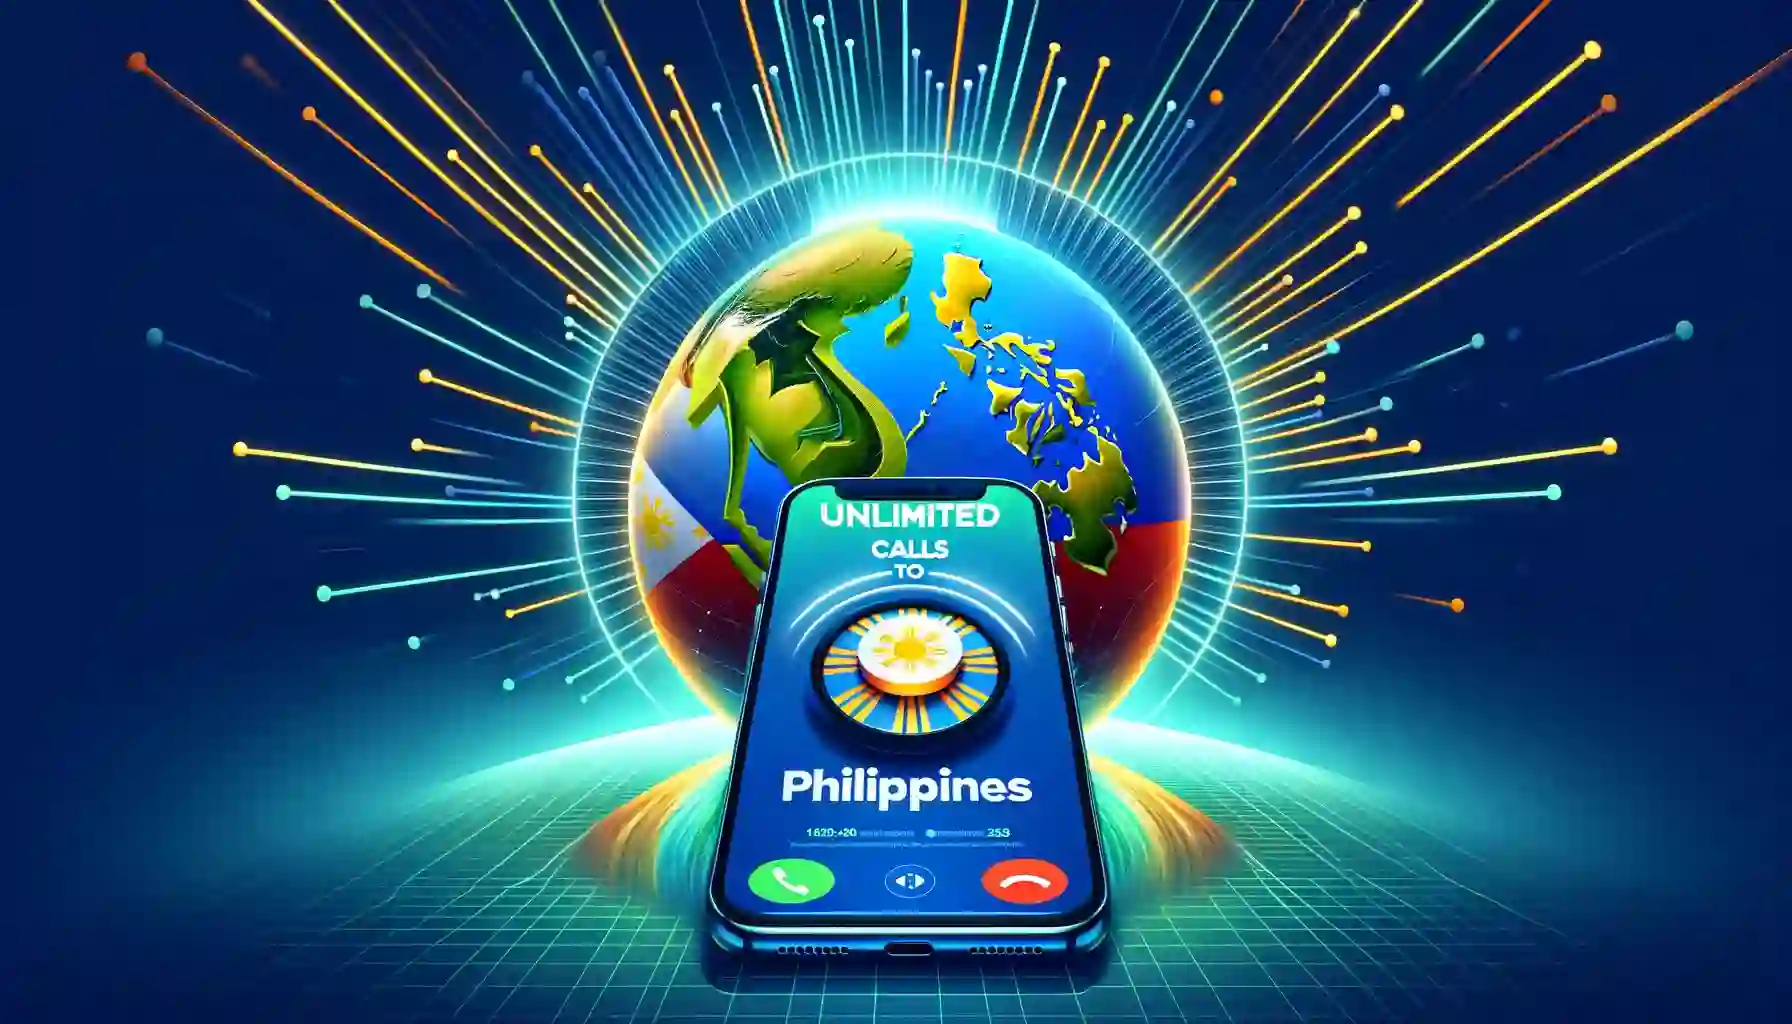 Unlimited calls to Philippines with Callmama